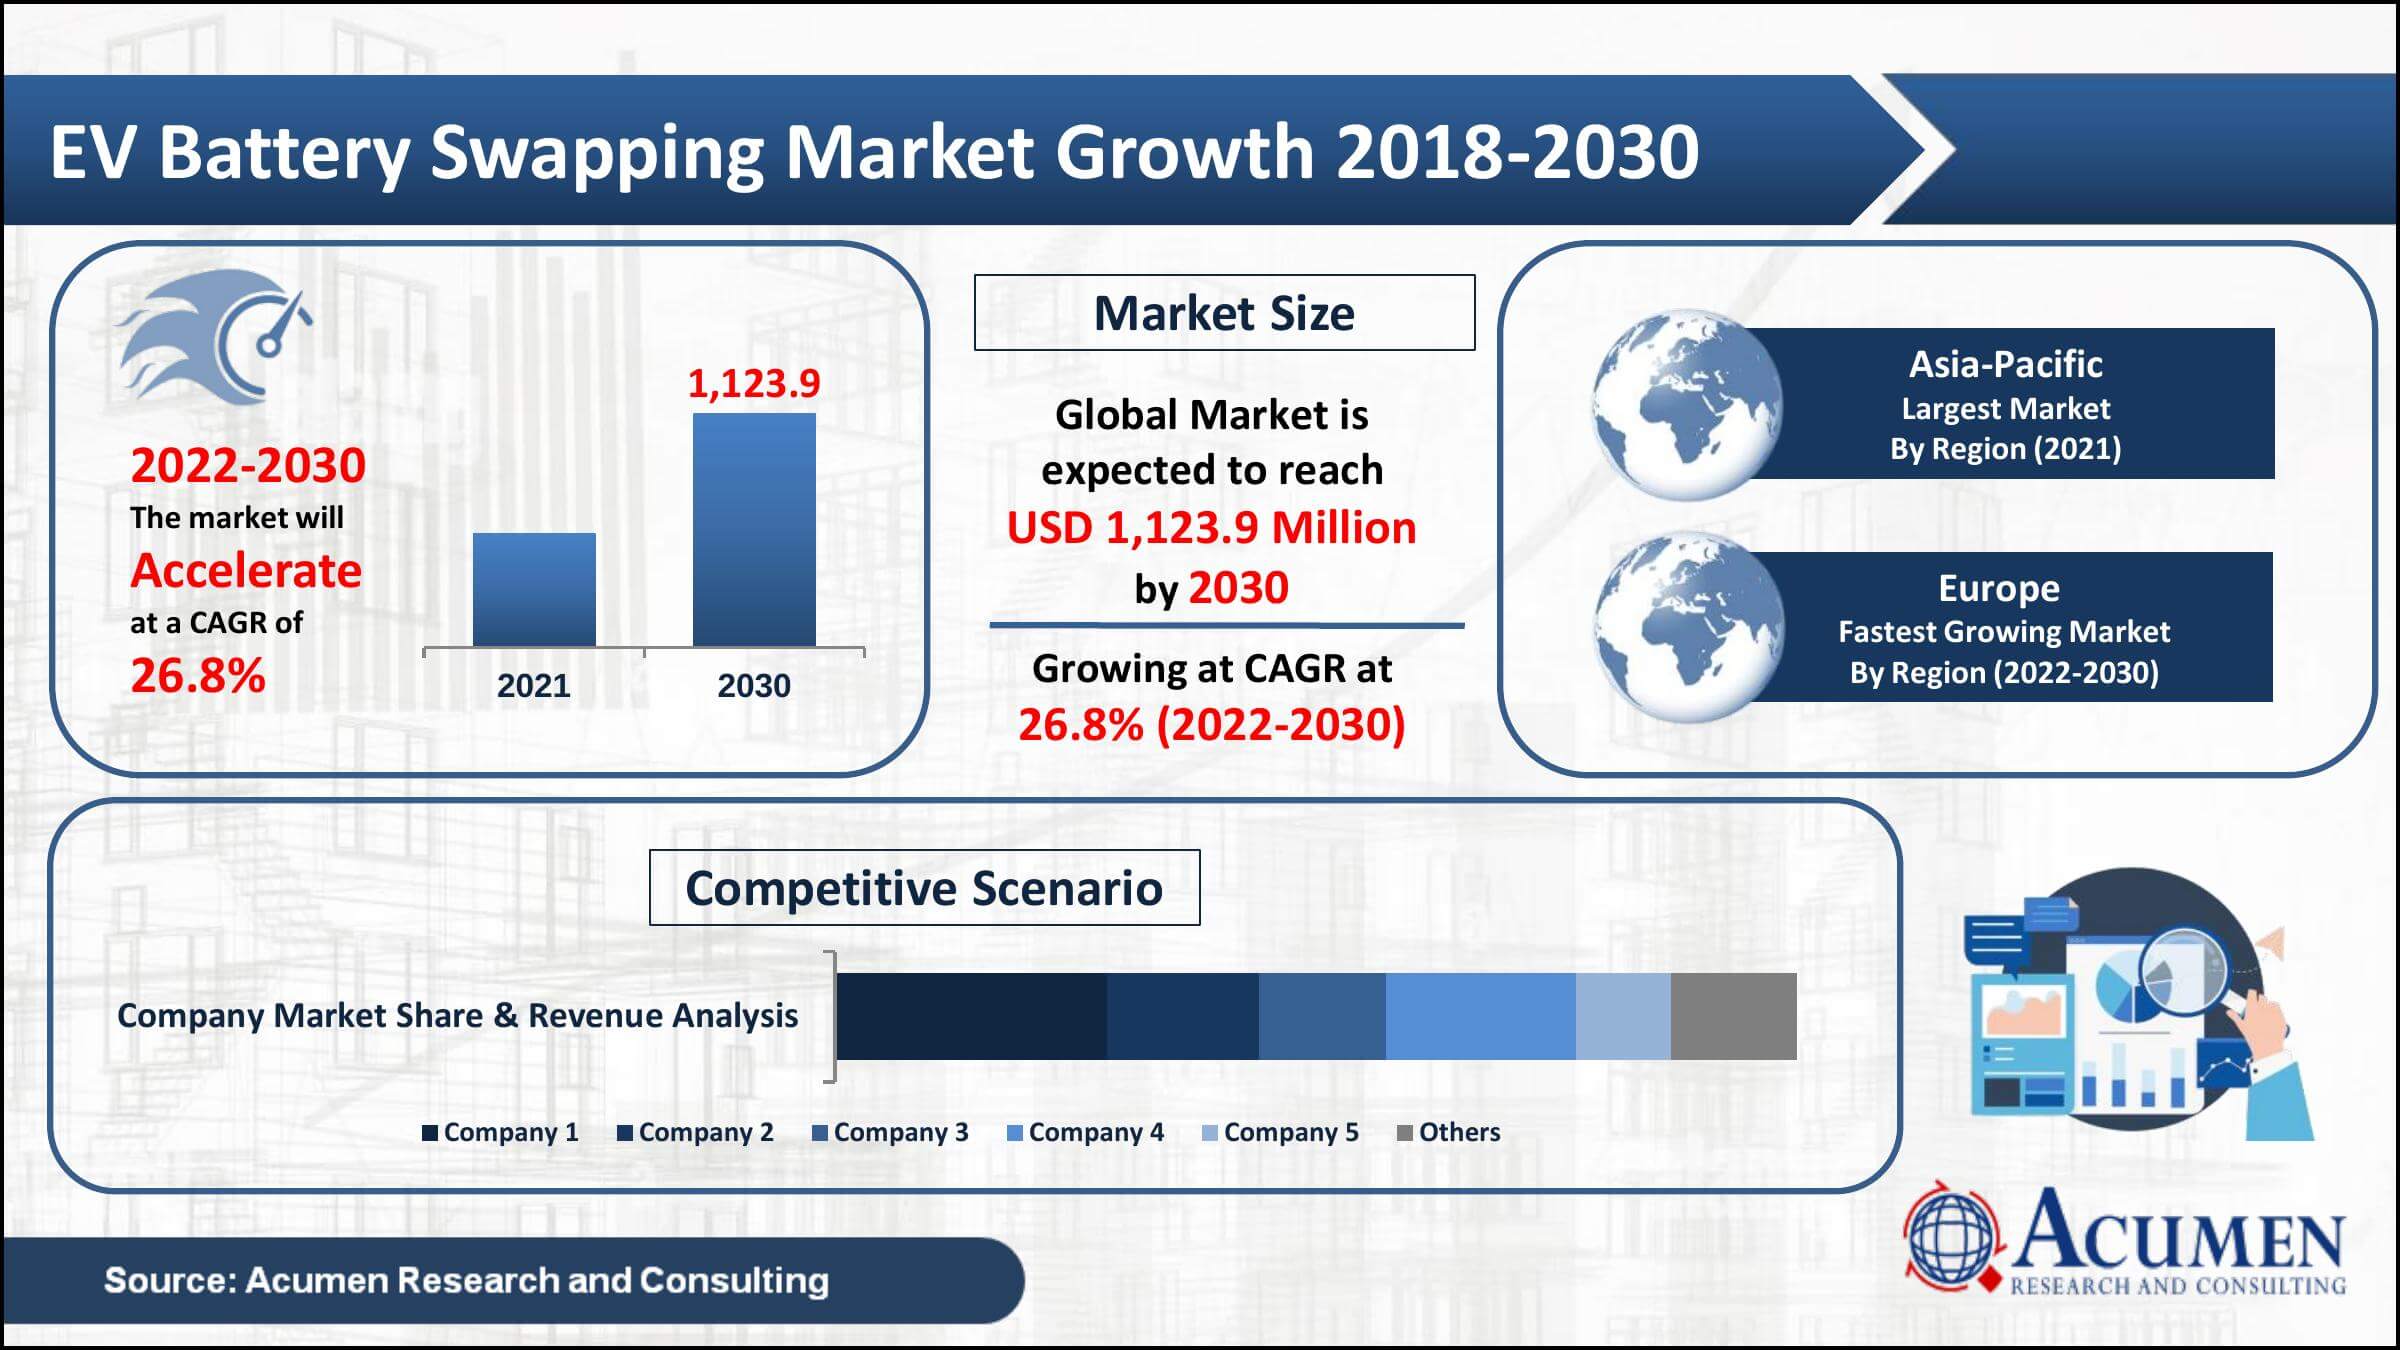 EV Battery Swapping Market value to reach USD 1,123.9 Million by 2030 at CAGR 26.8%